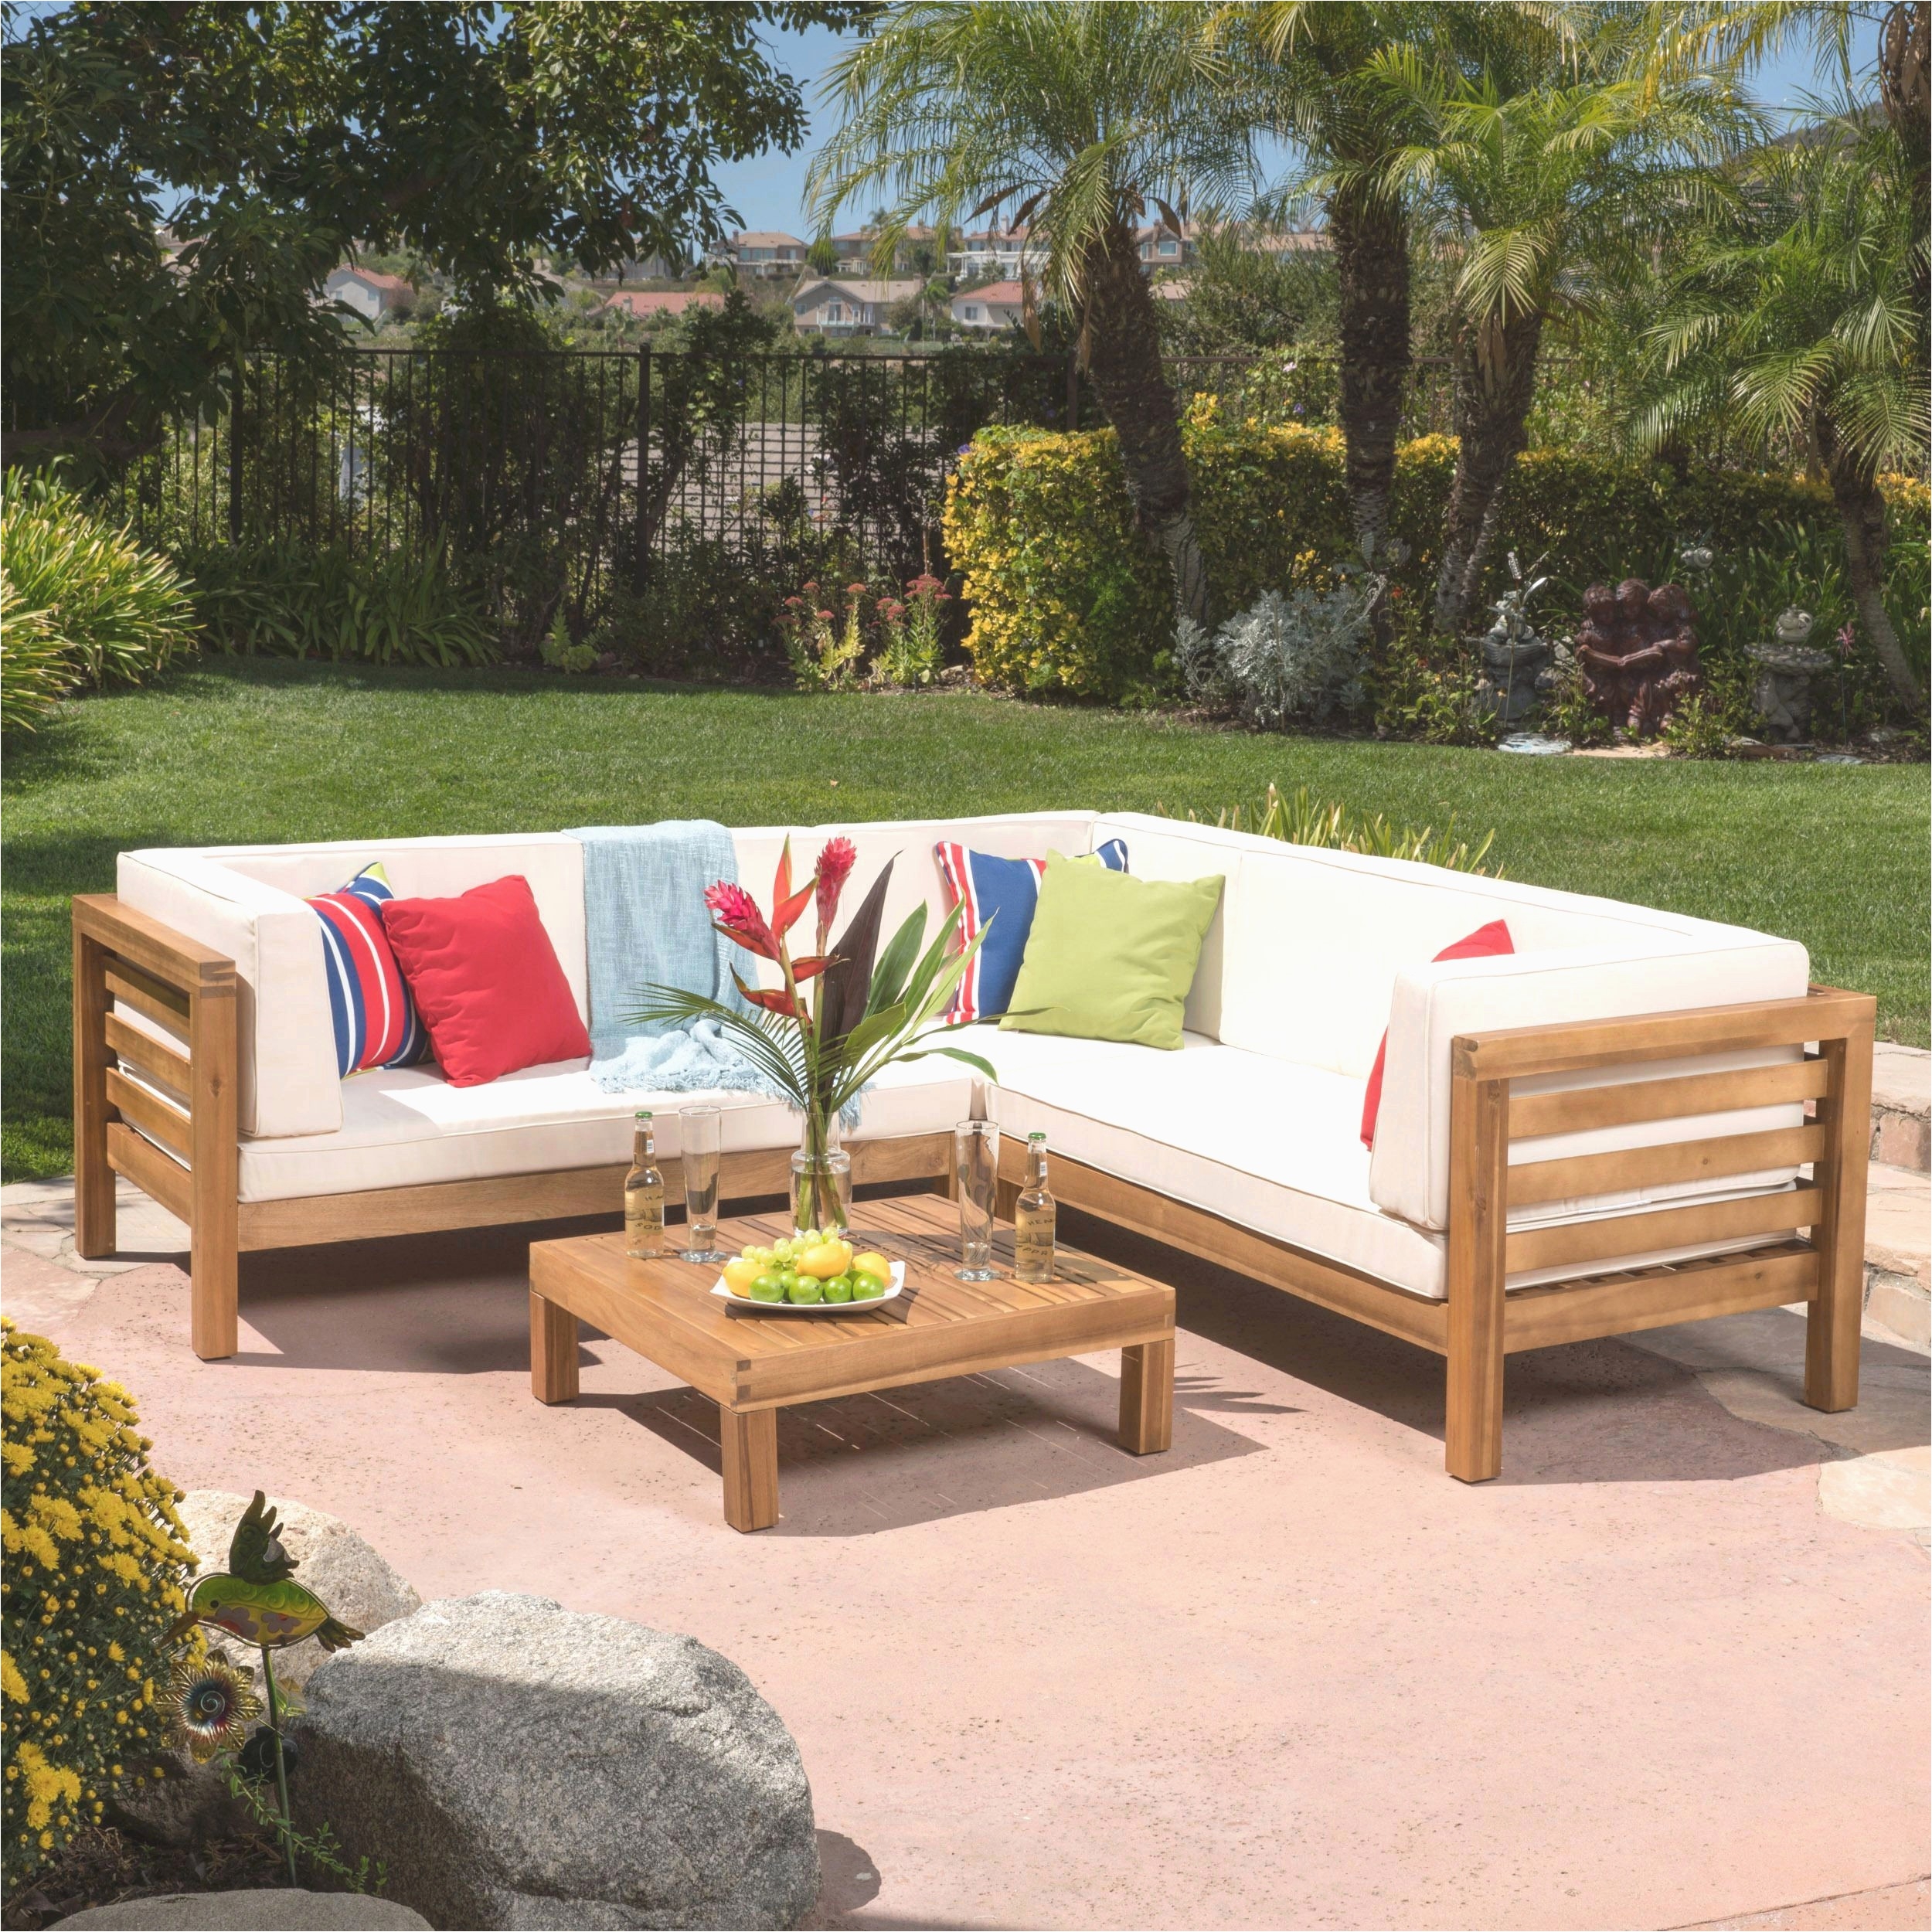 patio furniture stores beautiful tommy bahama outdoor furniture luxury outdoor sofa 0d patio chairs